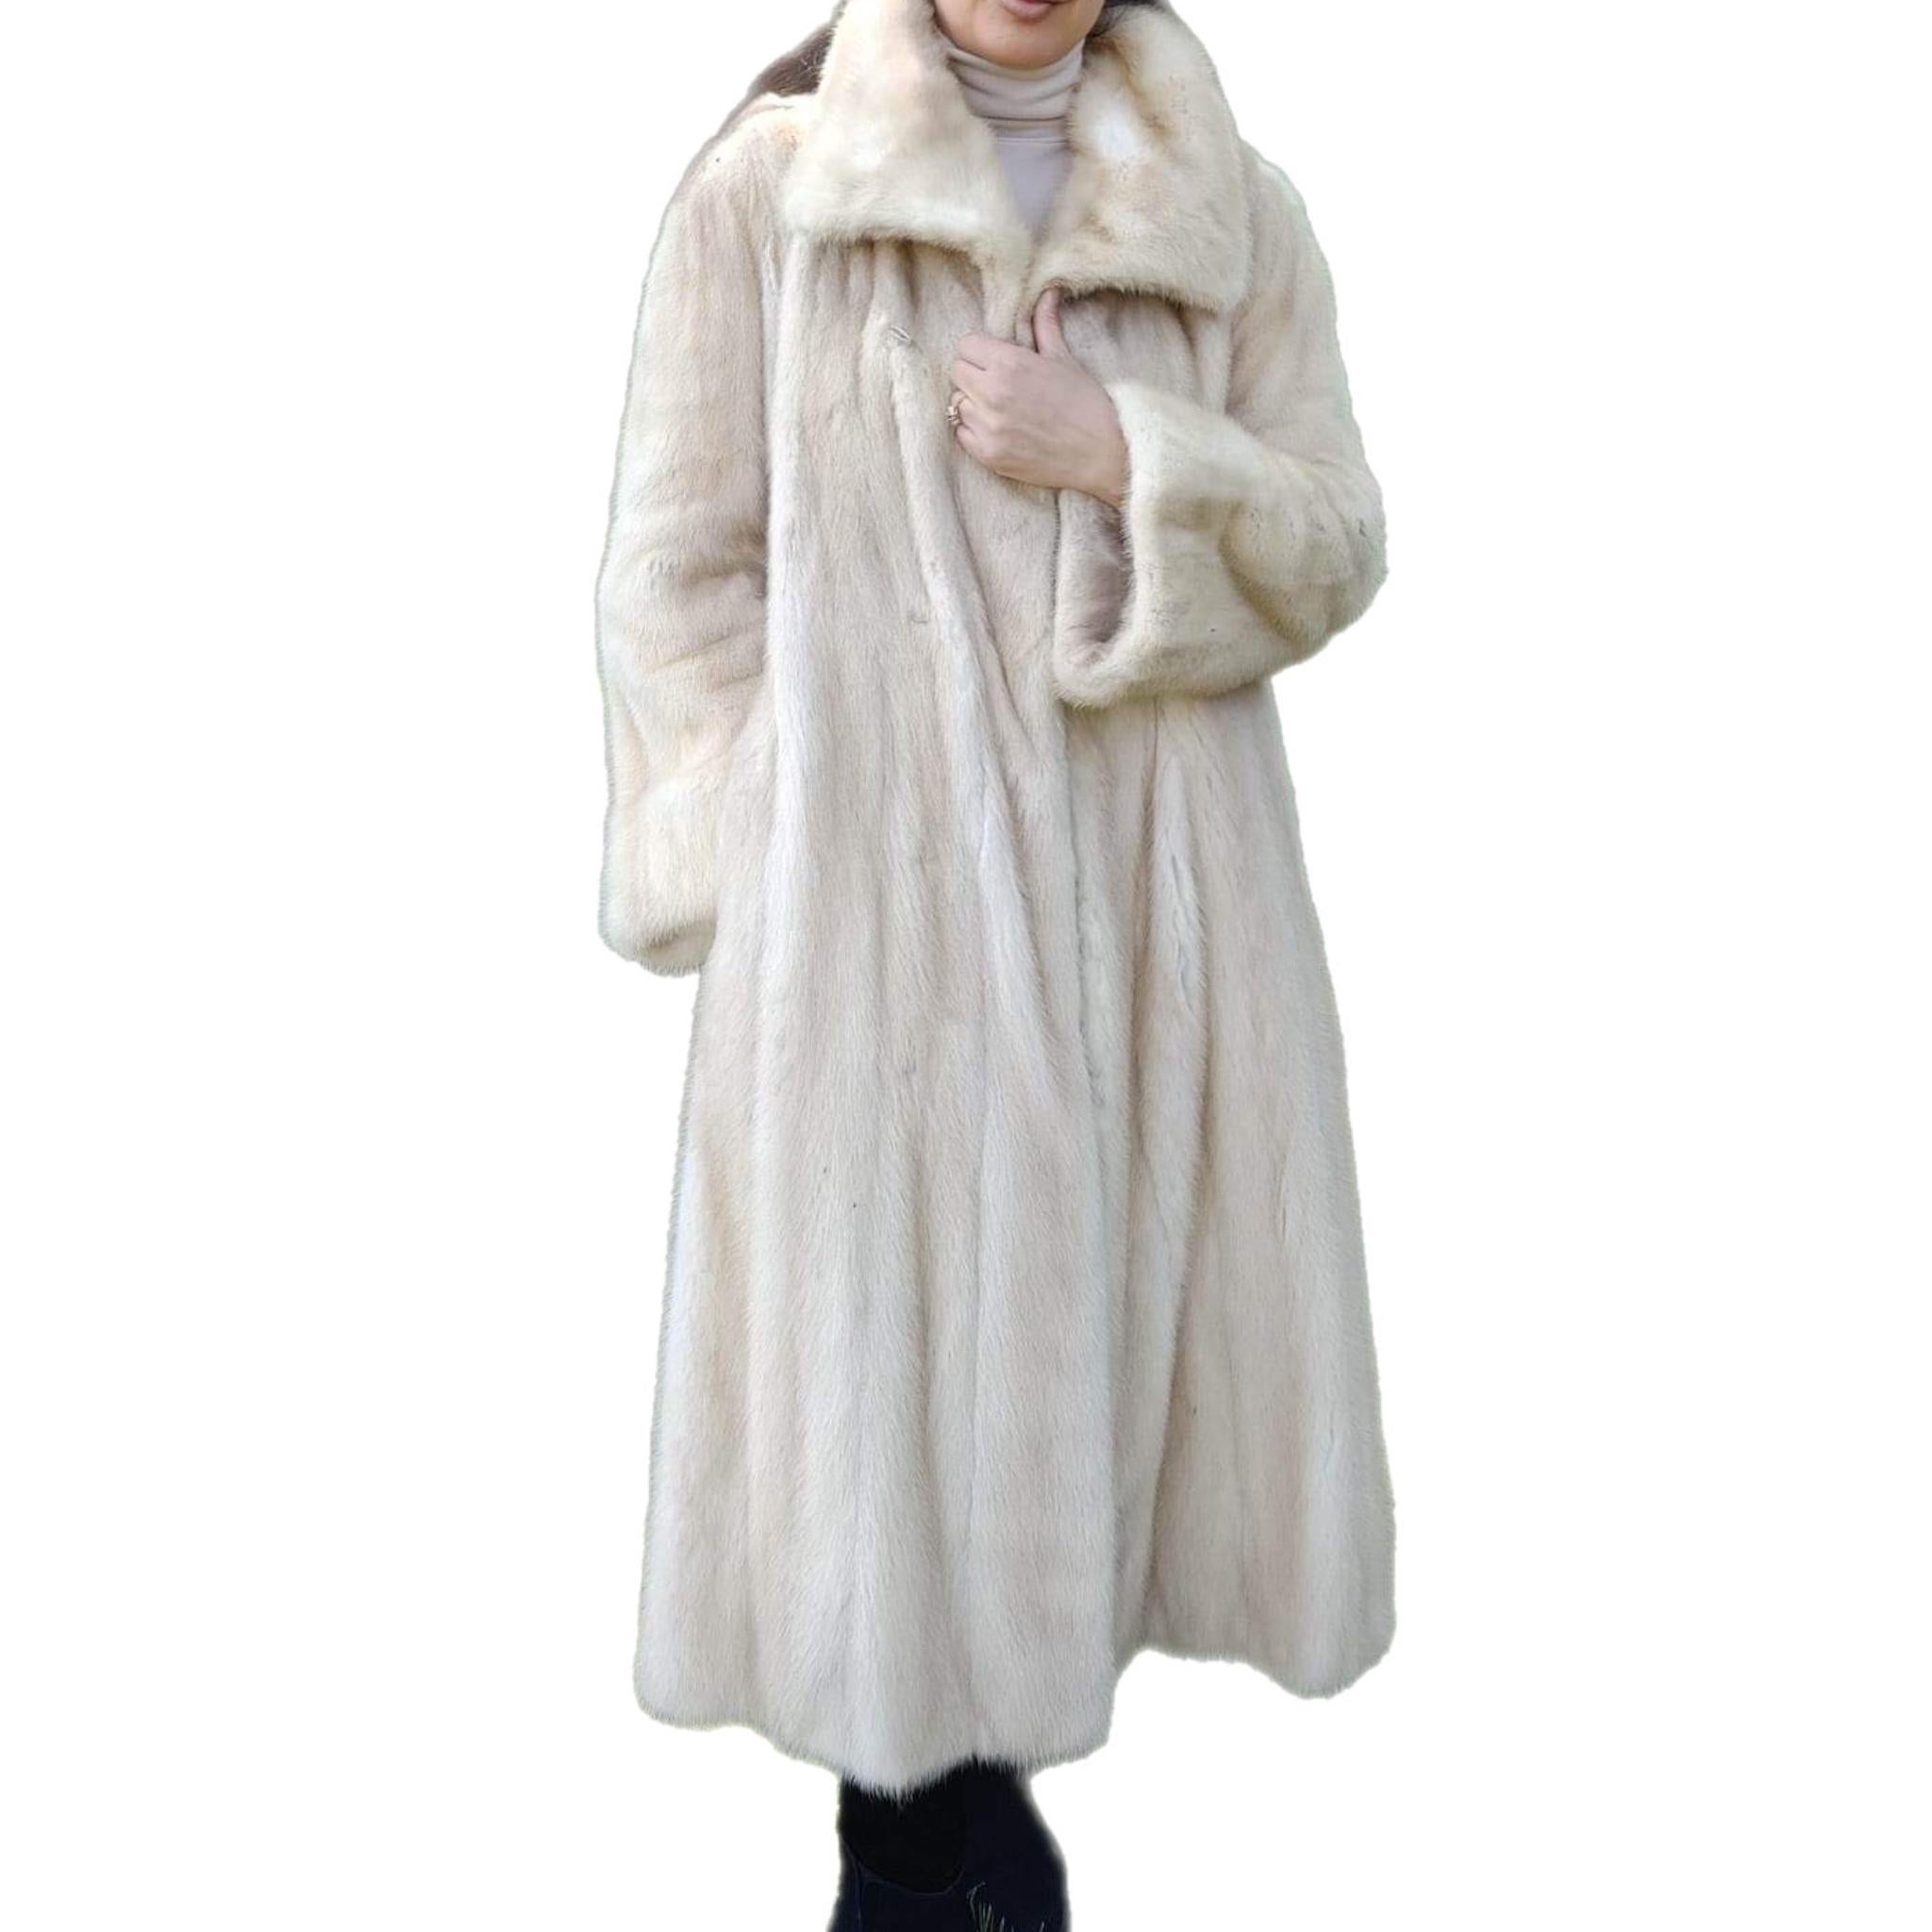 ~ Unused Blush Pastel Mink Fur Coat (Size 12 - l) 

When it comes to fur, Canada Majestic is the ultimate reference in quality and style. This stunning blush coat is a classic with the trench design and short collar stitching workmanship. It has a